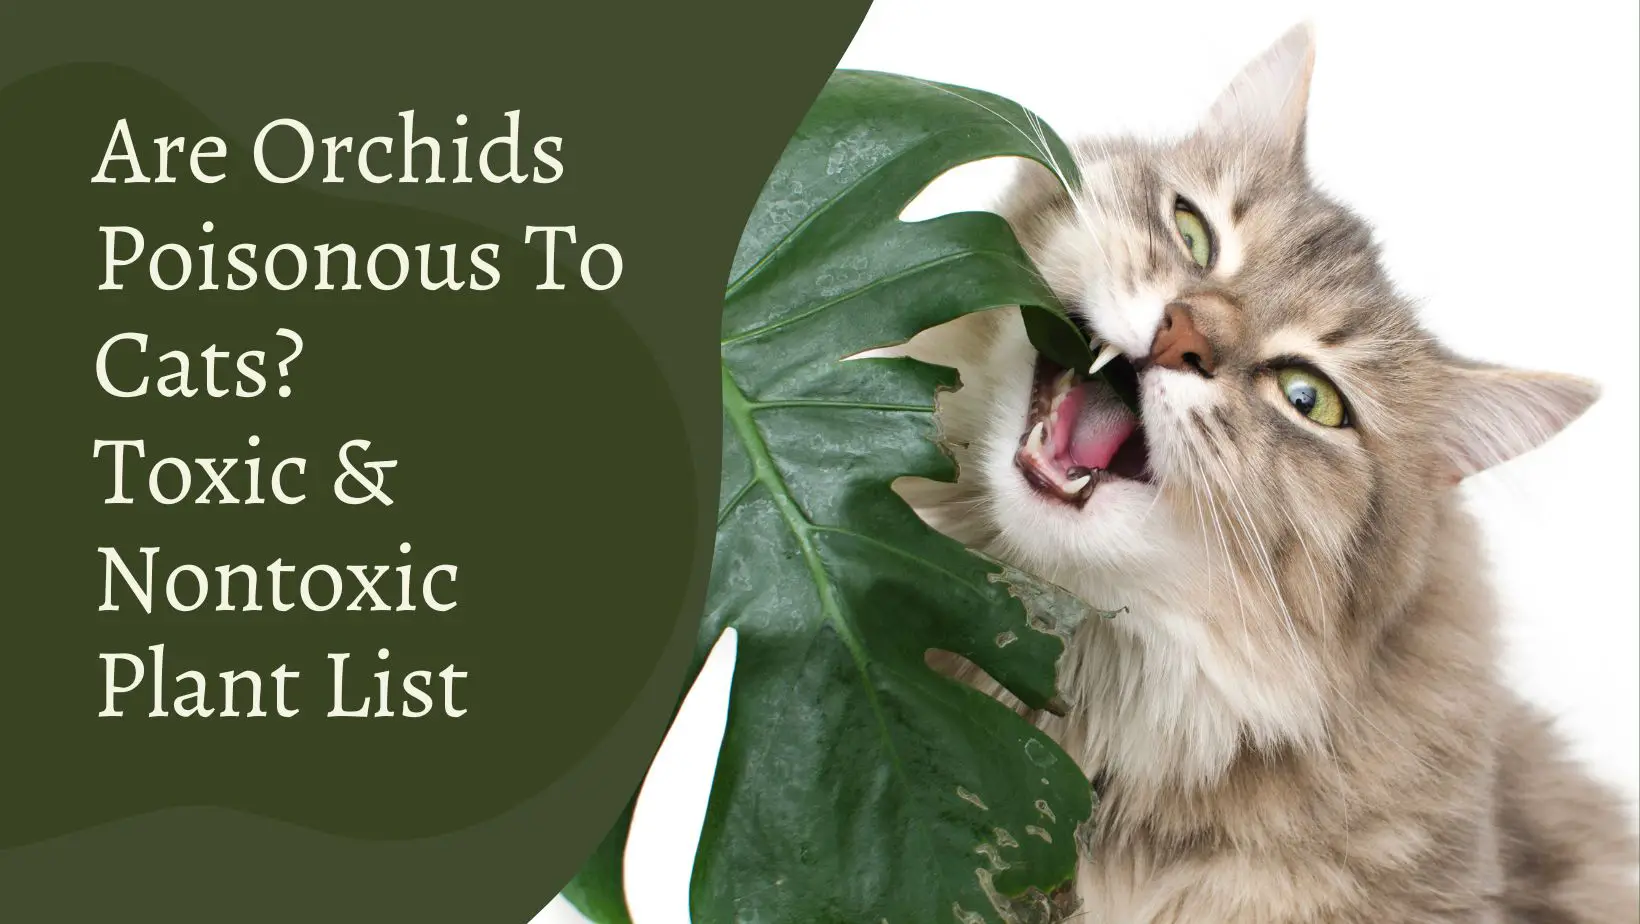 Are Orchids Poisonous To Cats